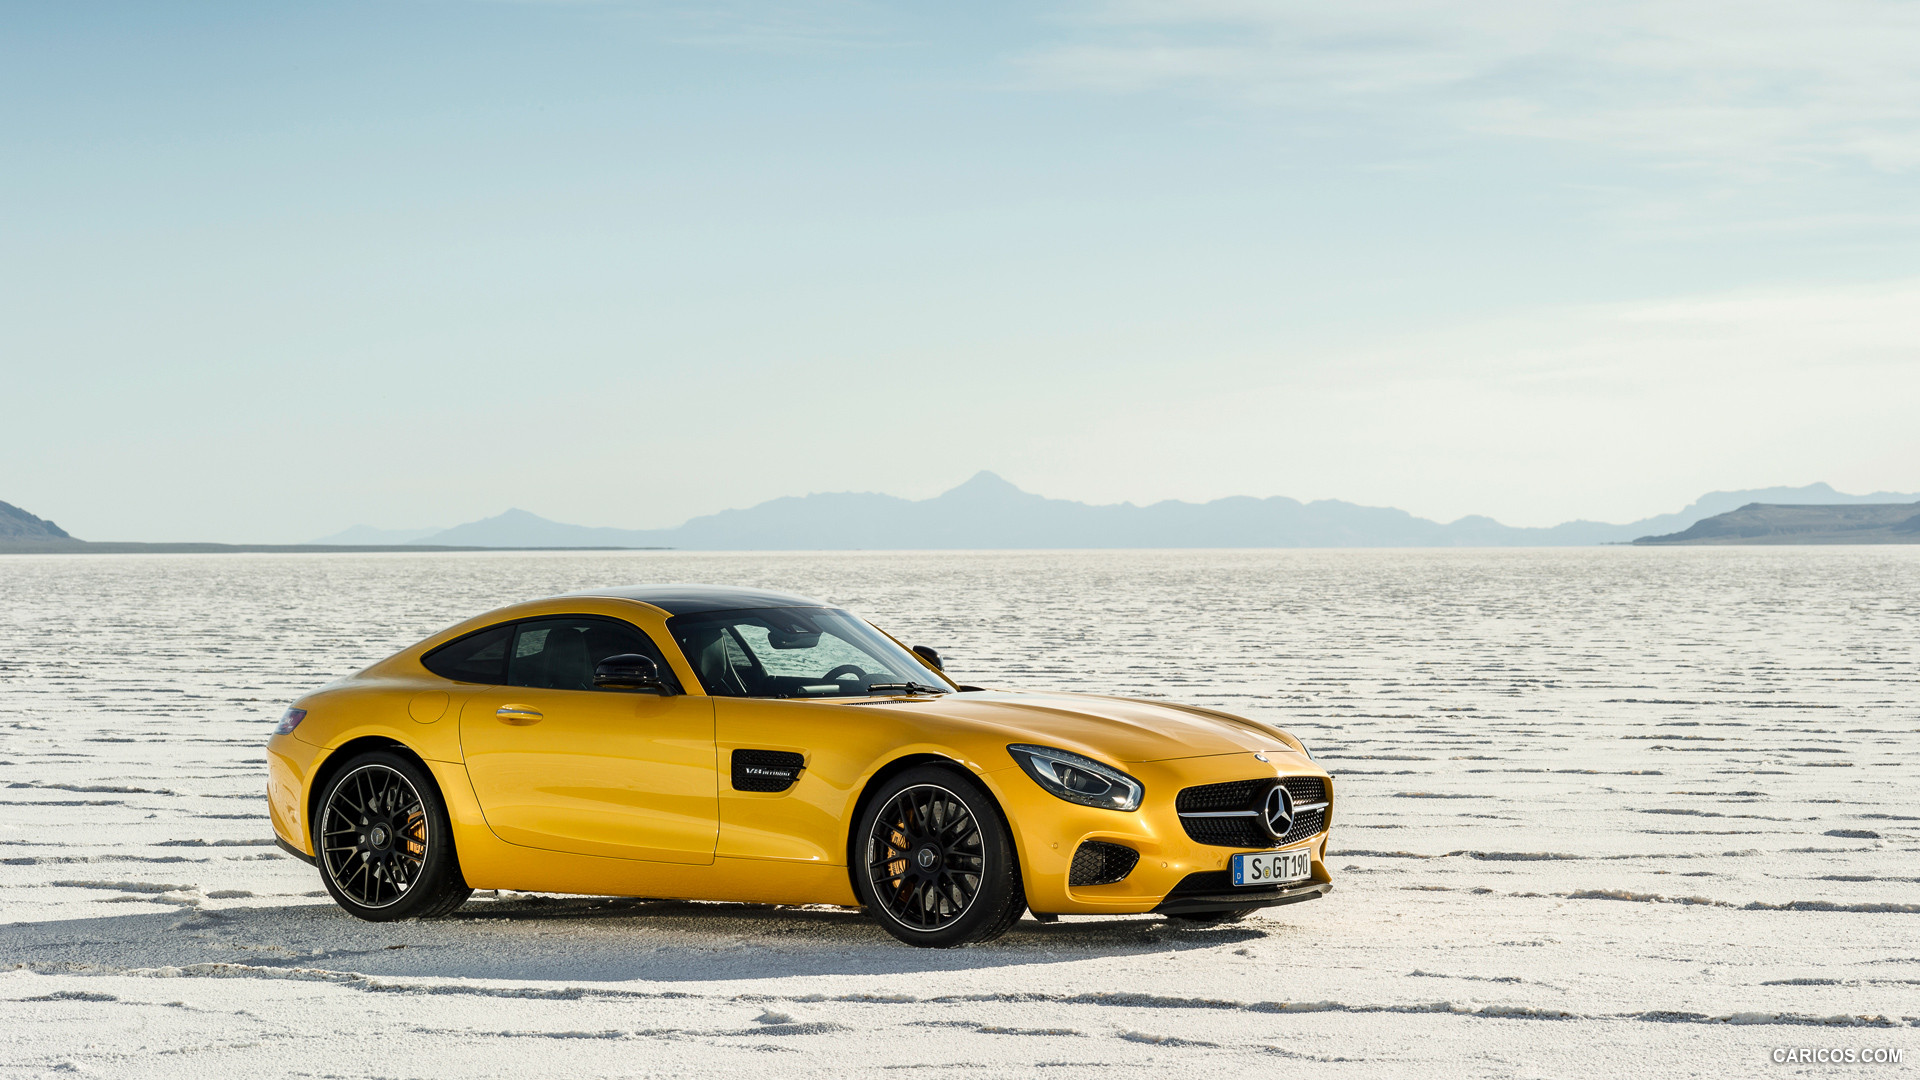 2016 Mercedes-AMG GT (Solarbeam) - Side, #68 of 190